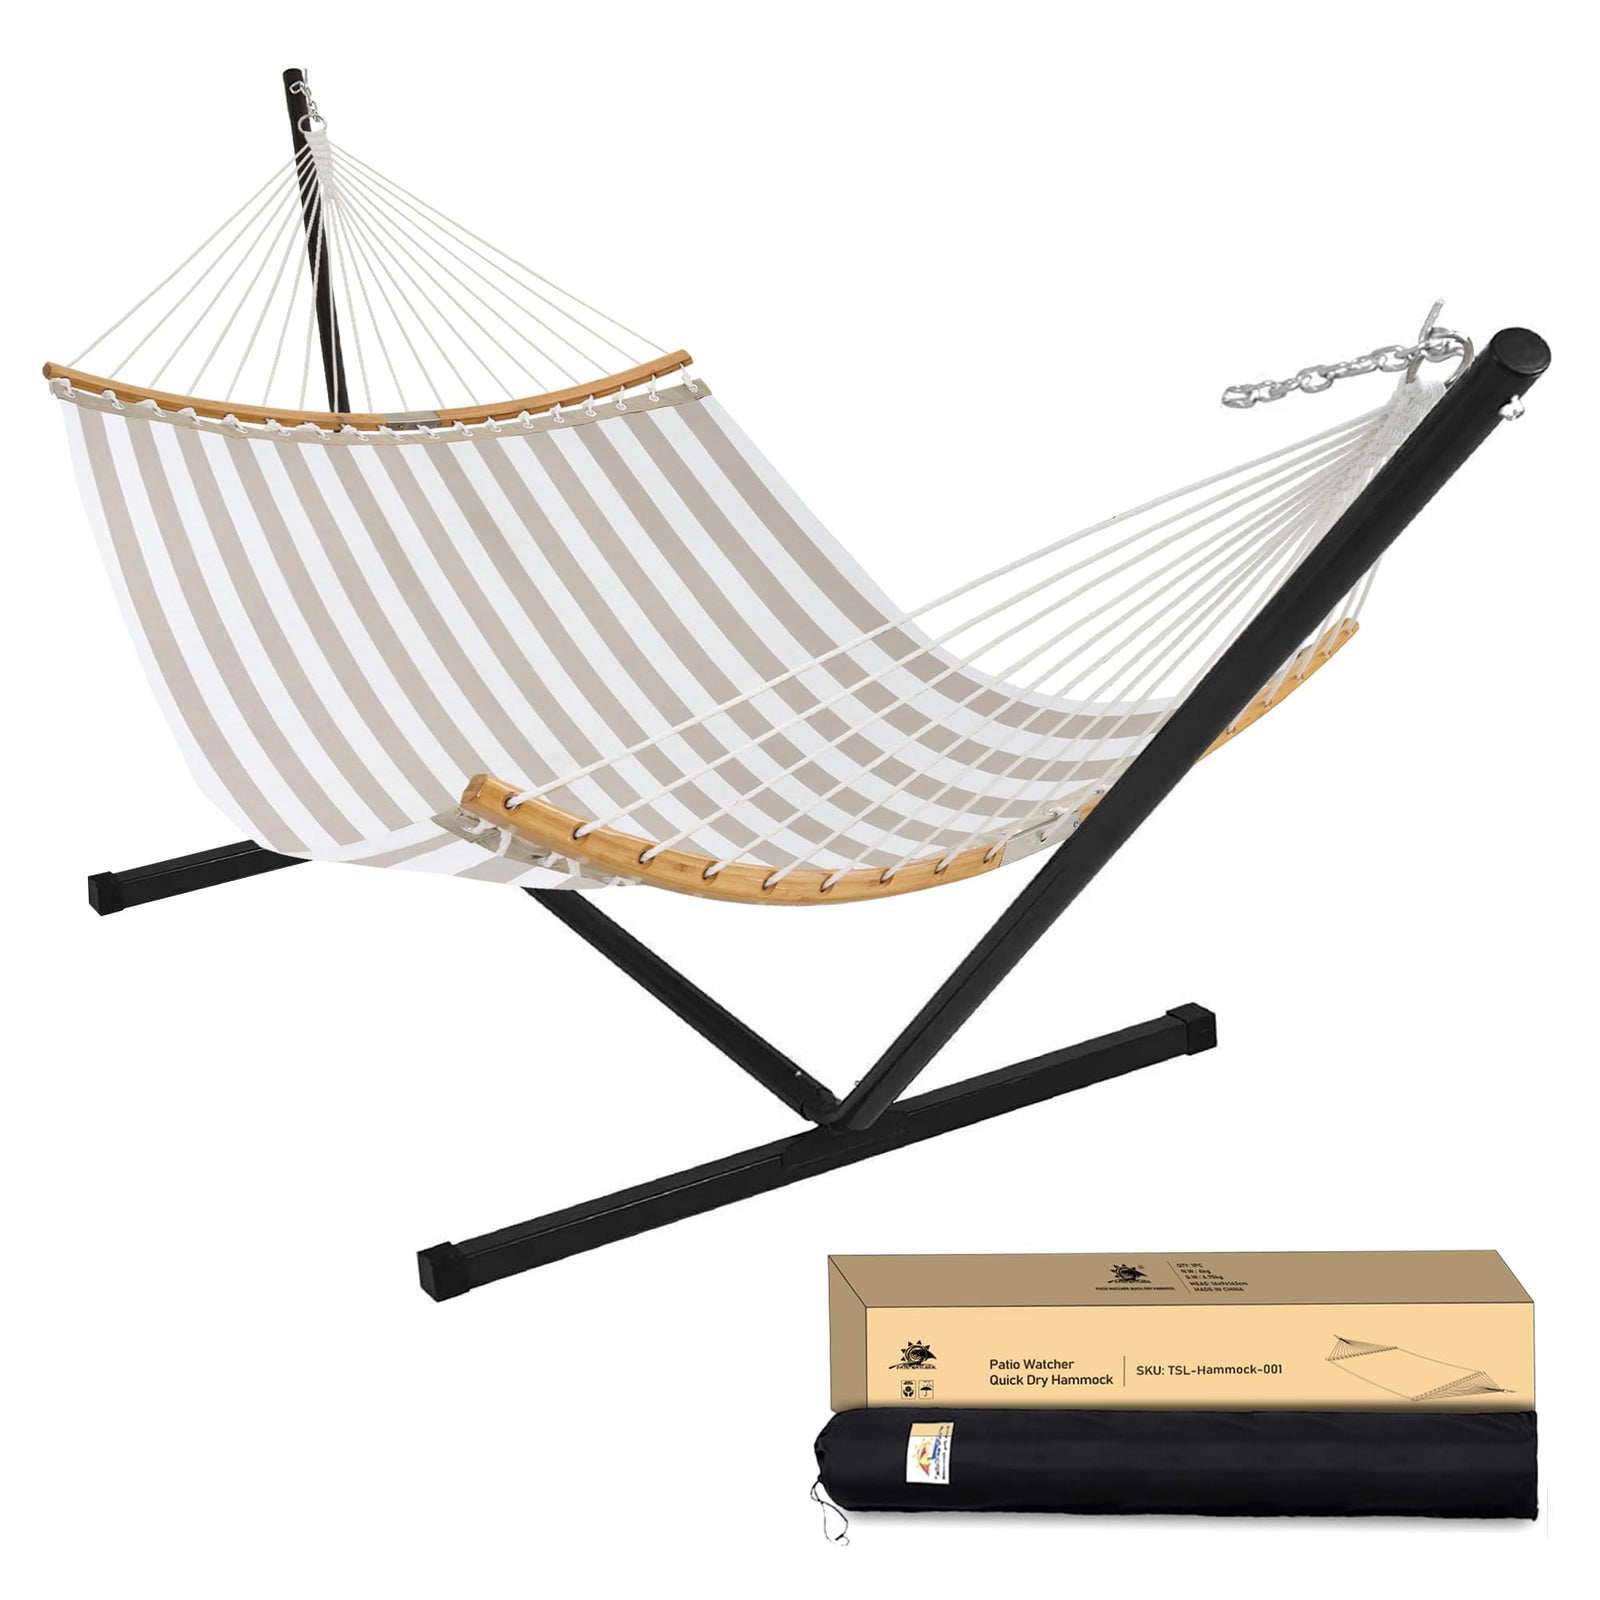 Patio Watcher 12 FT Double Quick Dry Hammock with Curved Bamboo Spreader Bar, Outdoor Patio Two Person Hammock with Portable Steel Stand,450 lbs Capacity, Beige White